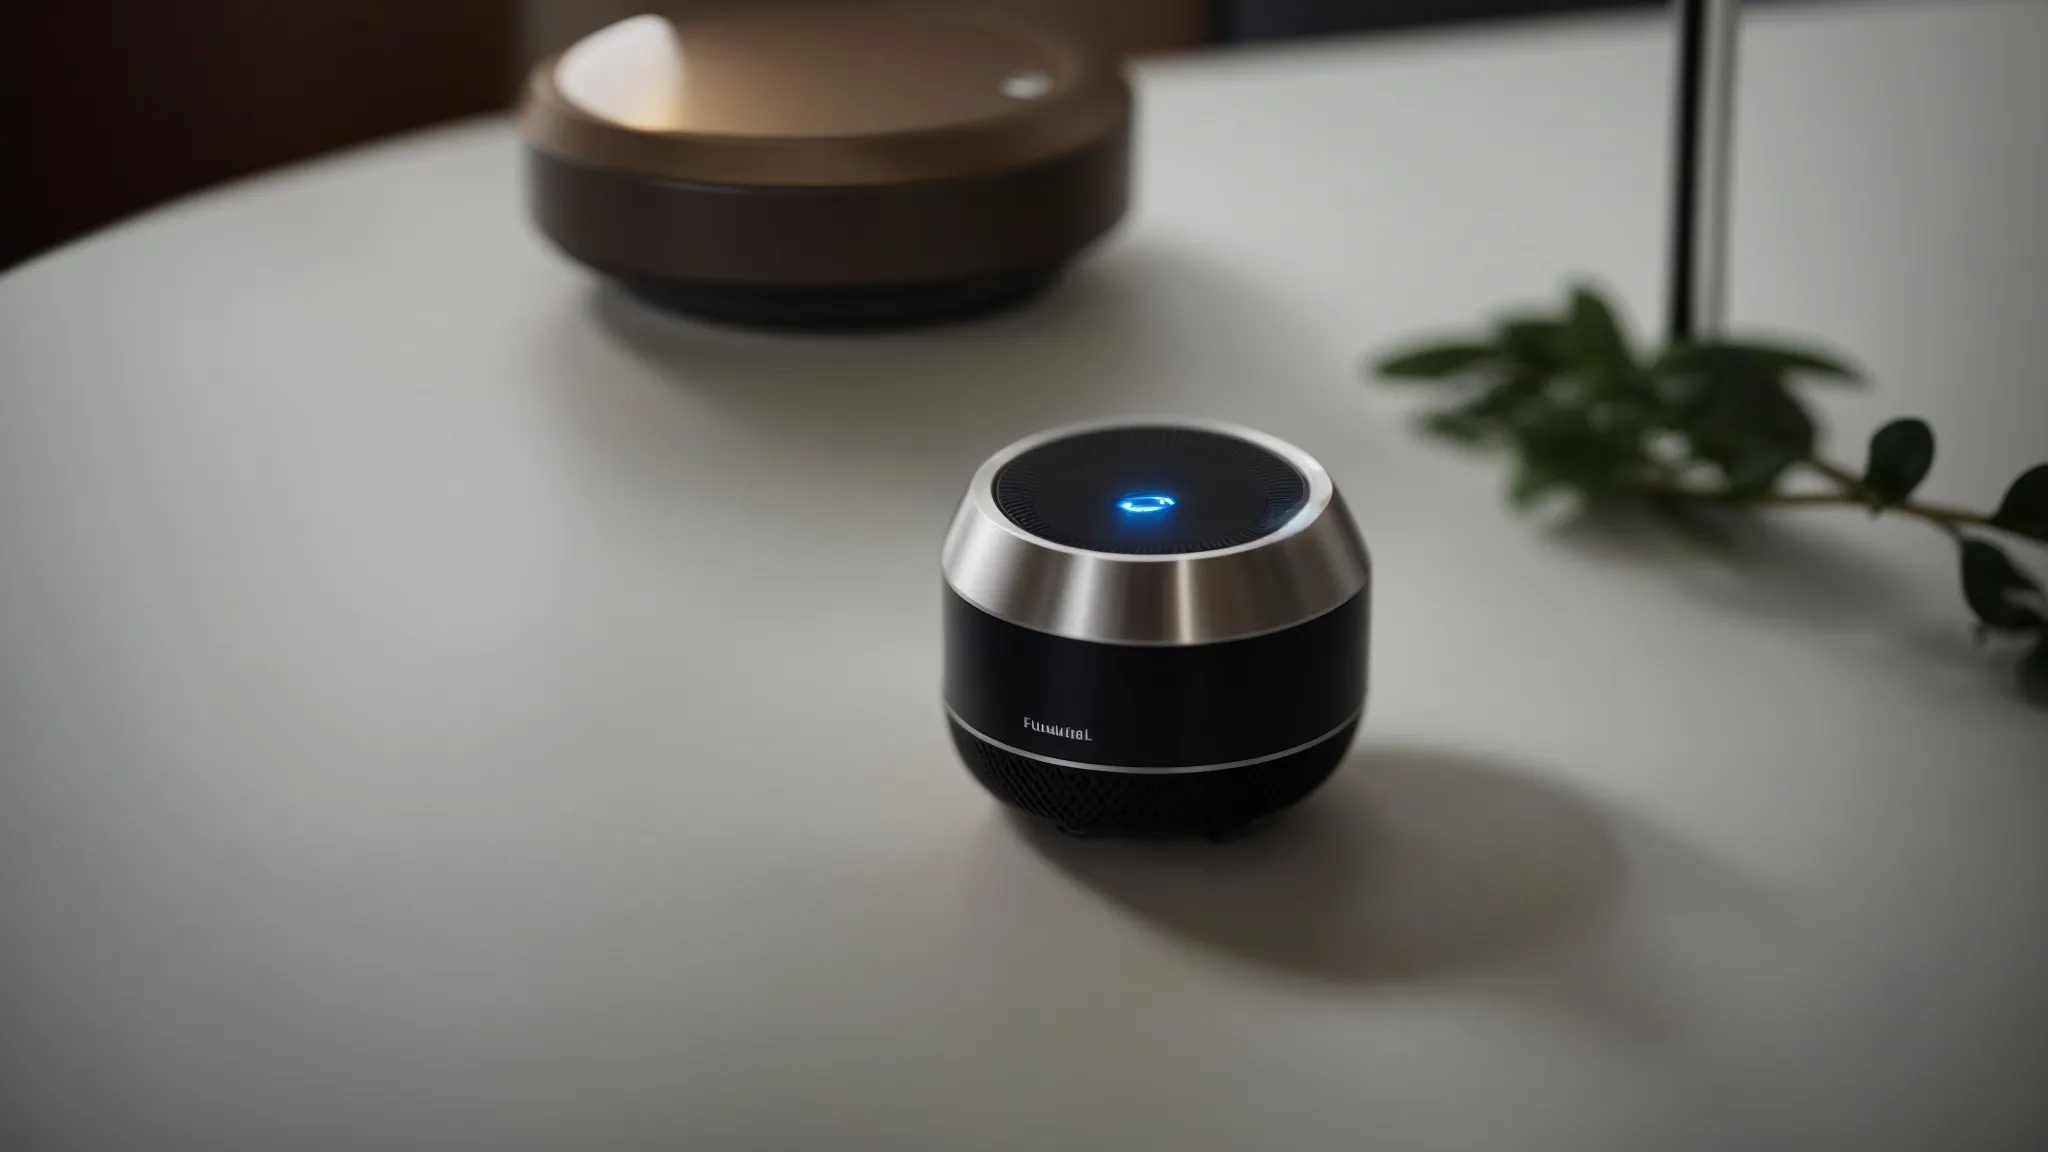 a voice-activated device lights up in response to a user's spoken query in a smart home environment.